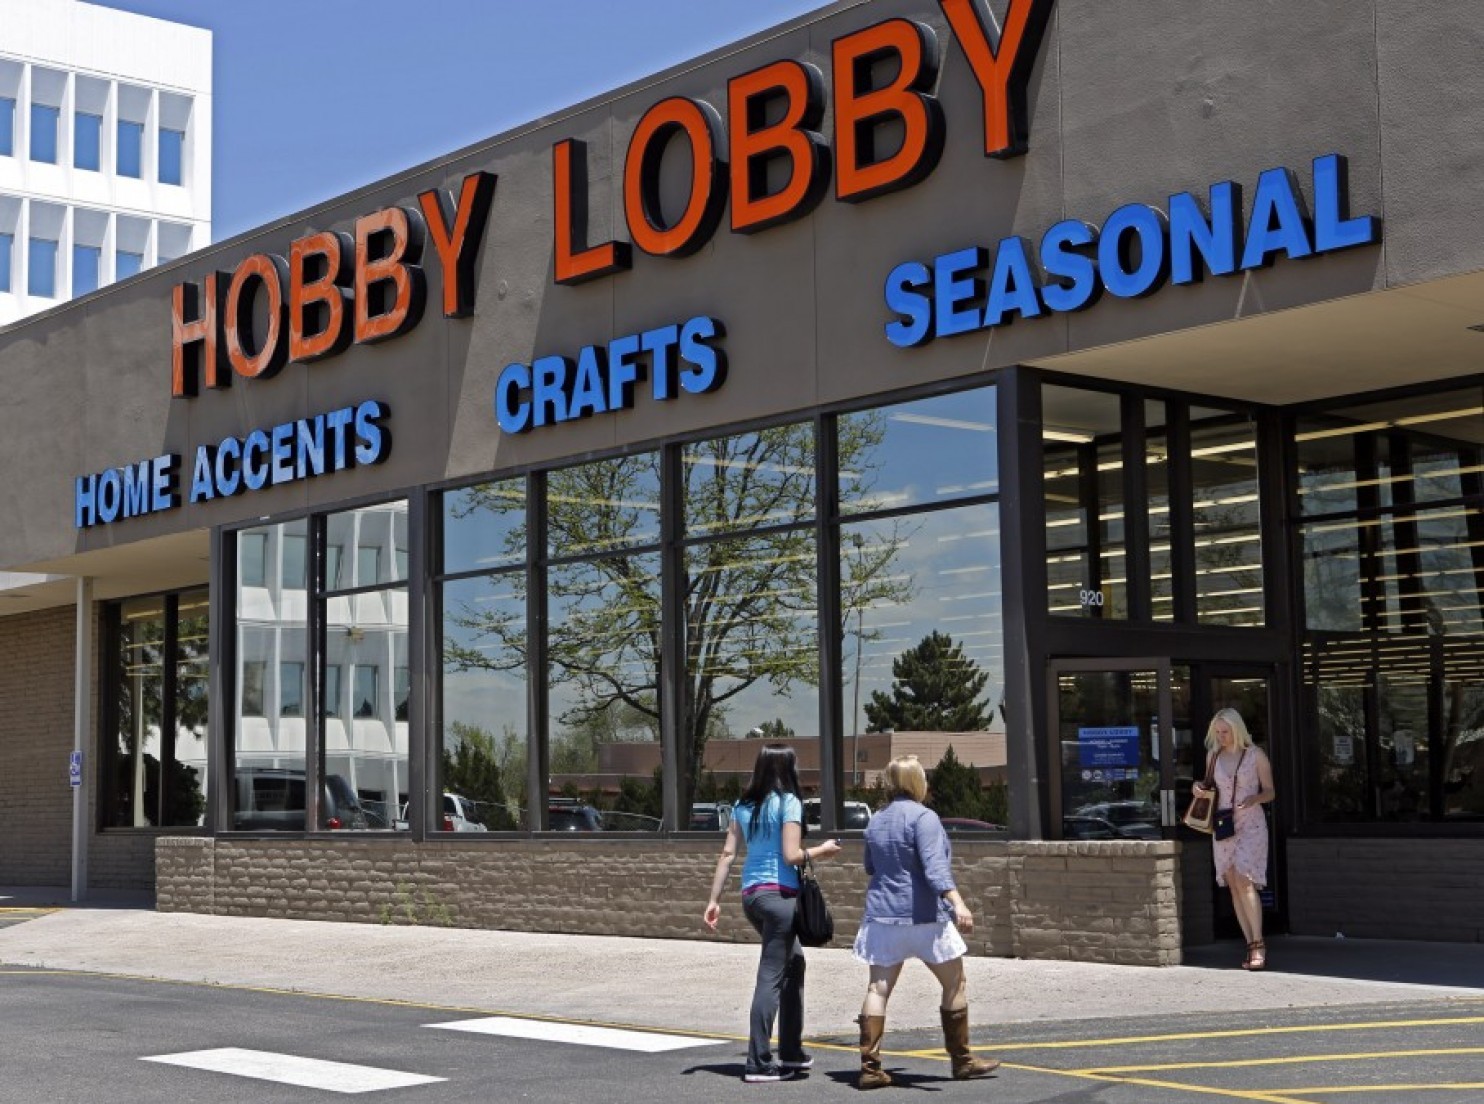 portable-antiquity-collecting-and-heritage-issues-hobby-lobby-owners-said-to-be-cooperating